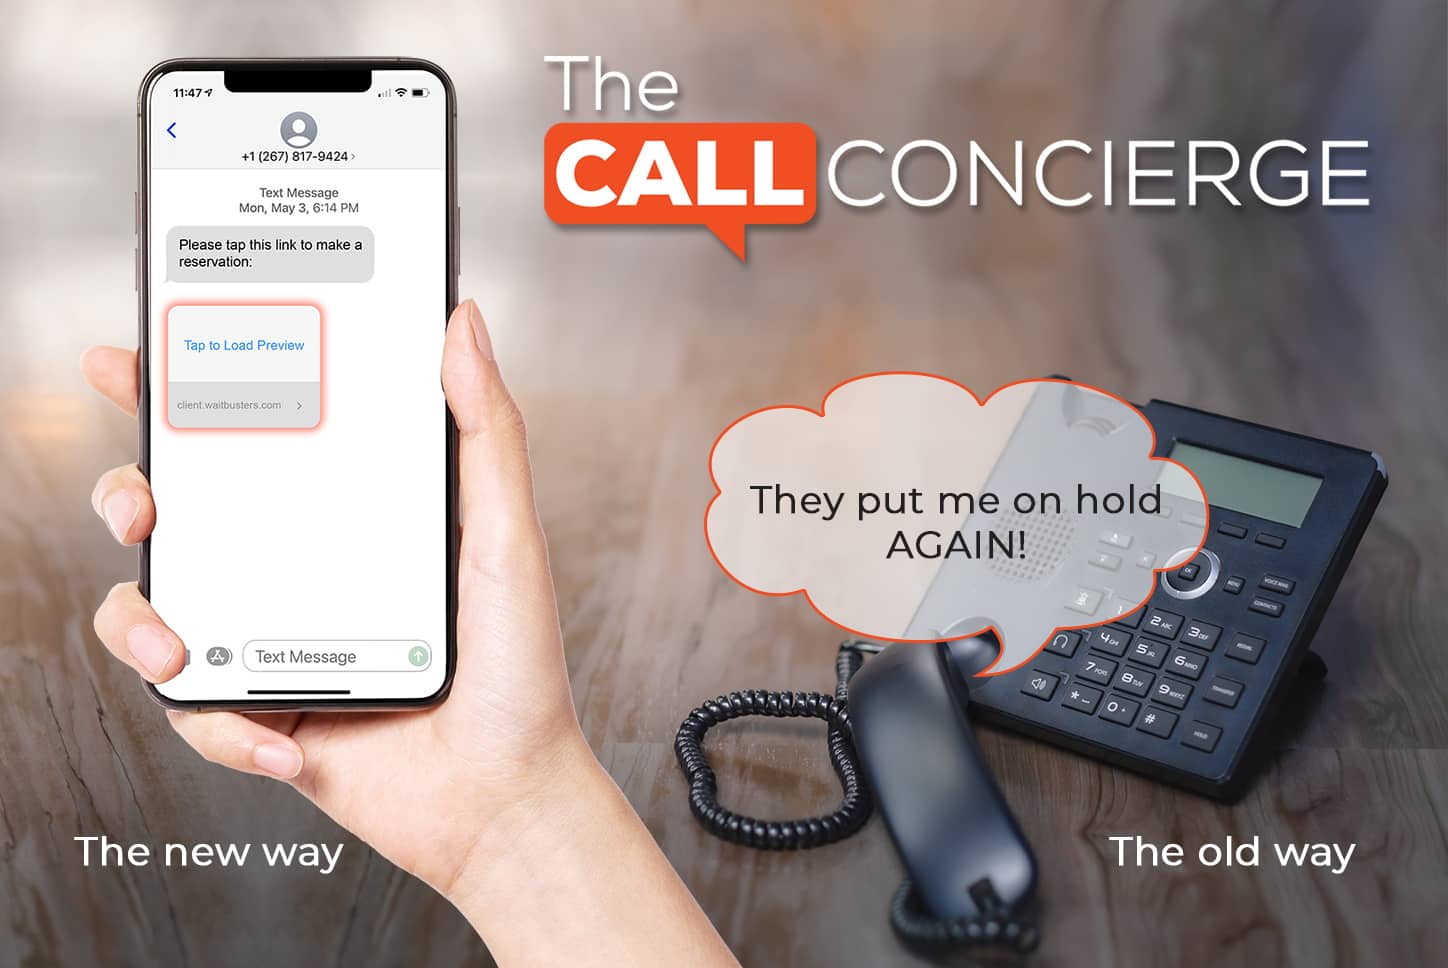 The old way is absolett. The Call Concierge will keep your customers happy.